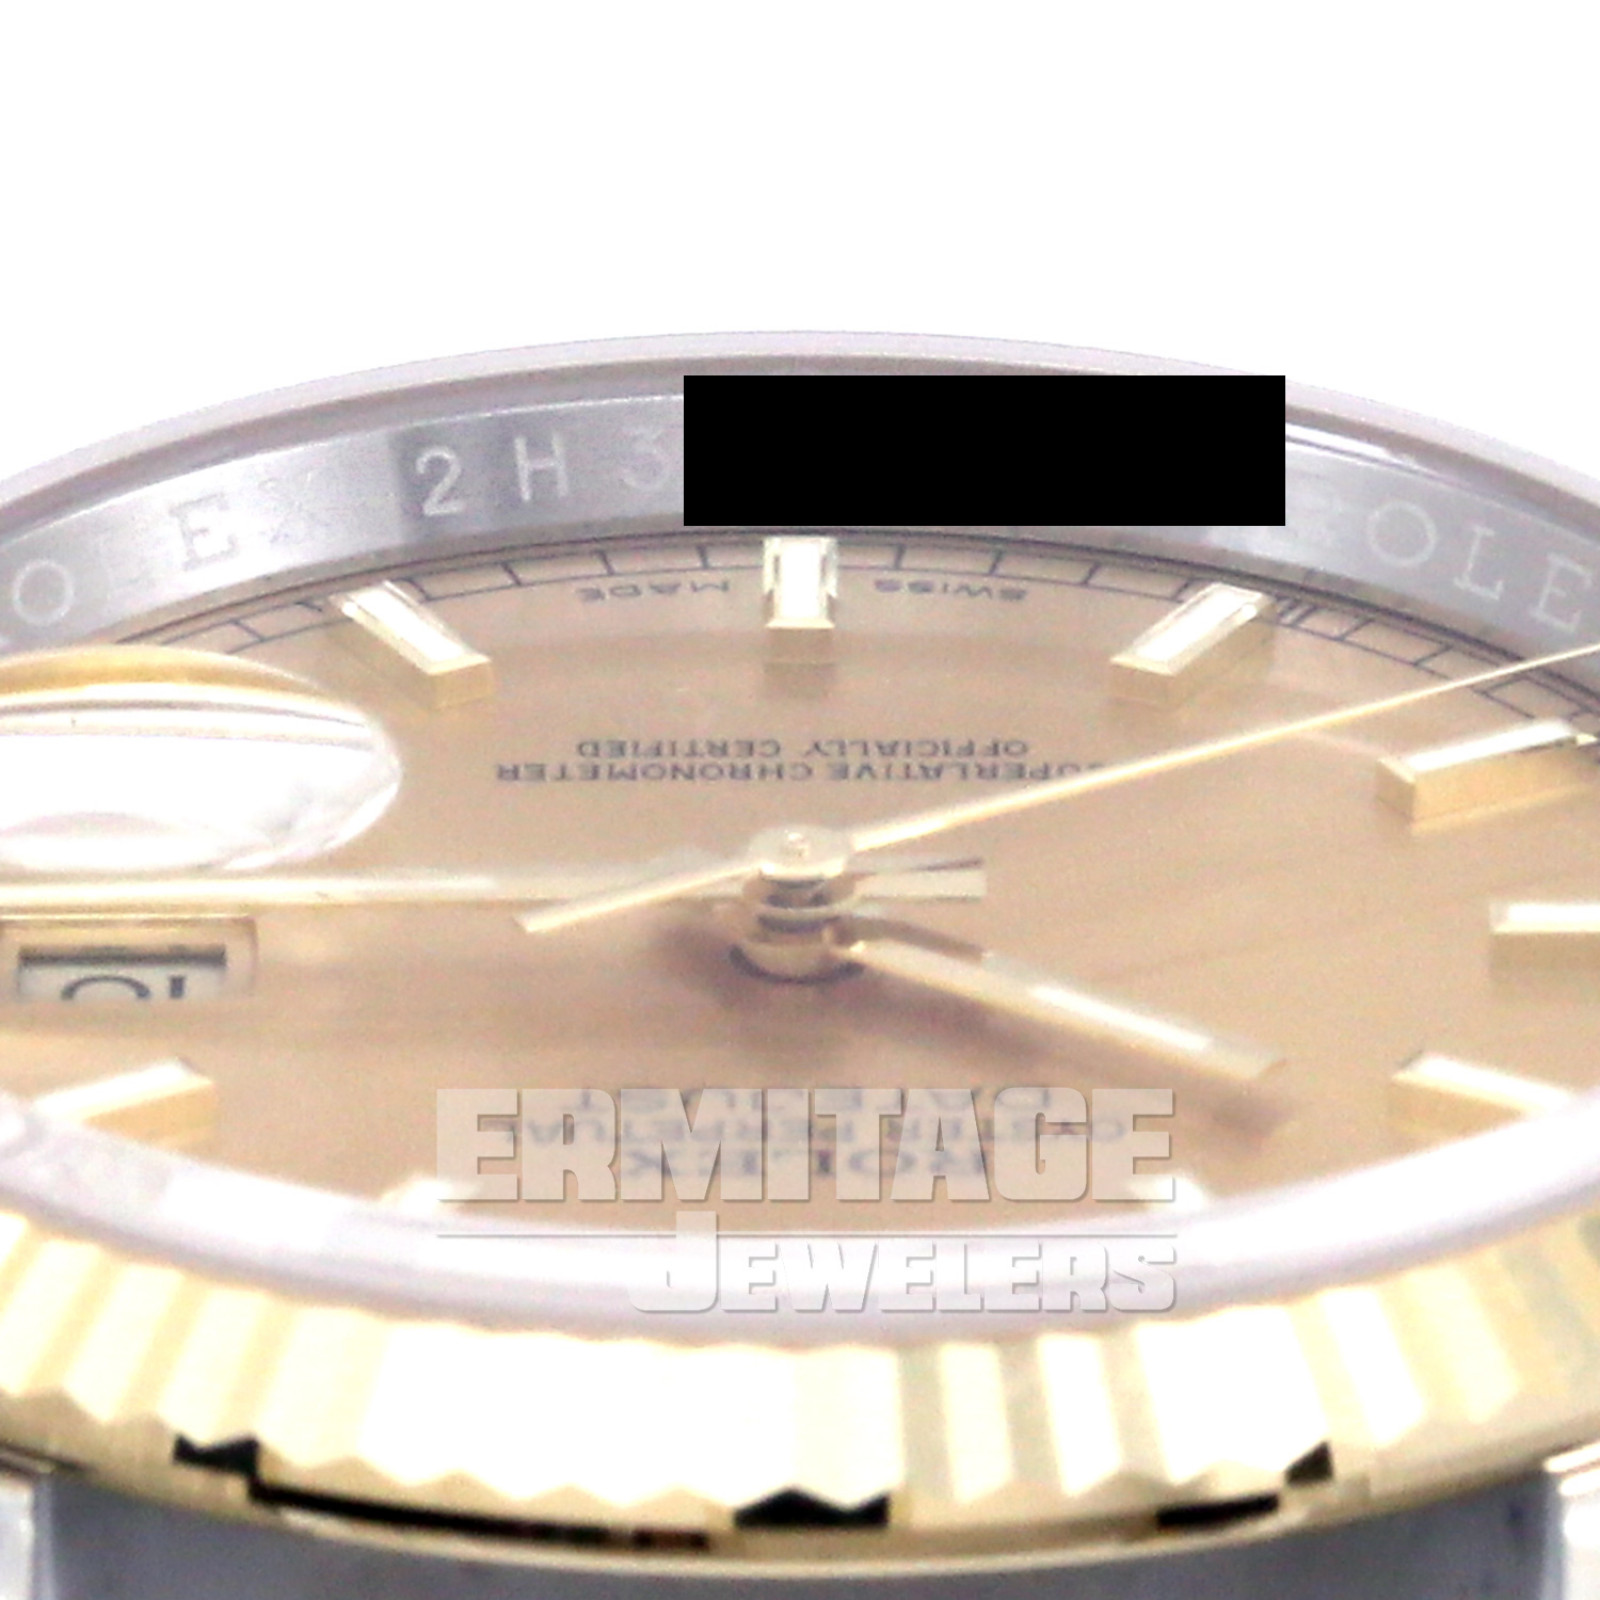 Classic Rolex Datejust 116233 with Champagne Dial